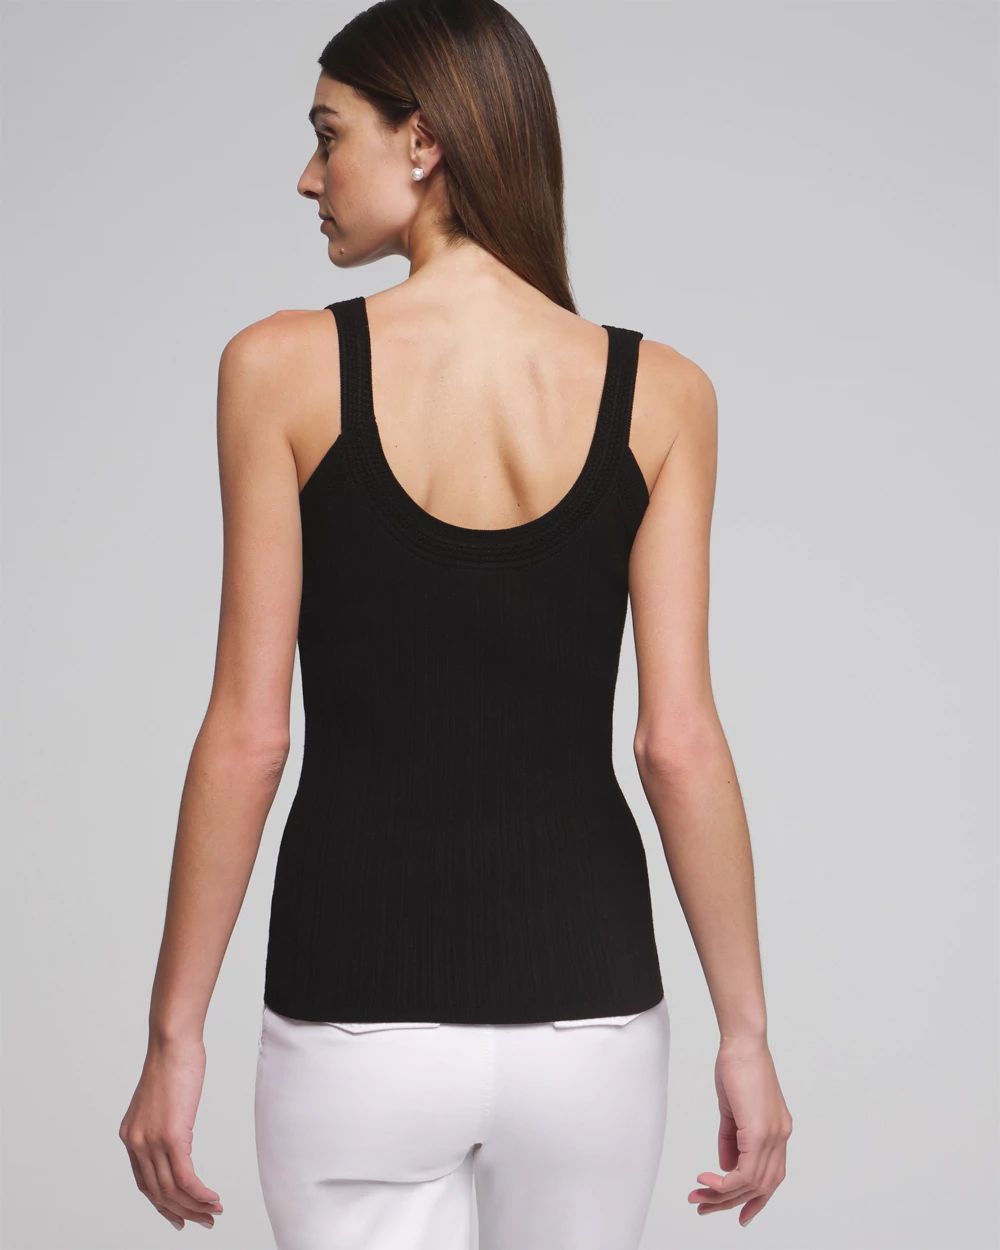 Outlet WHBM Stitch Accent Tank